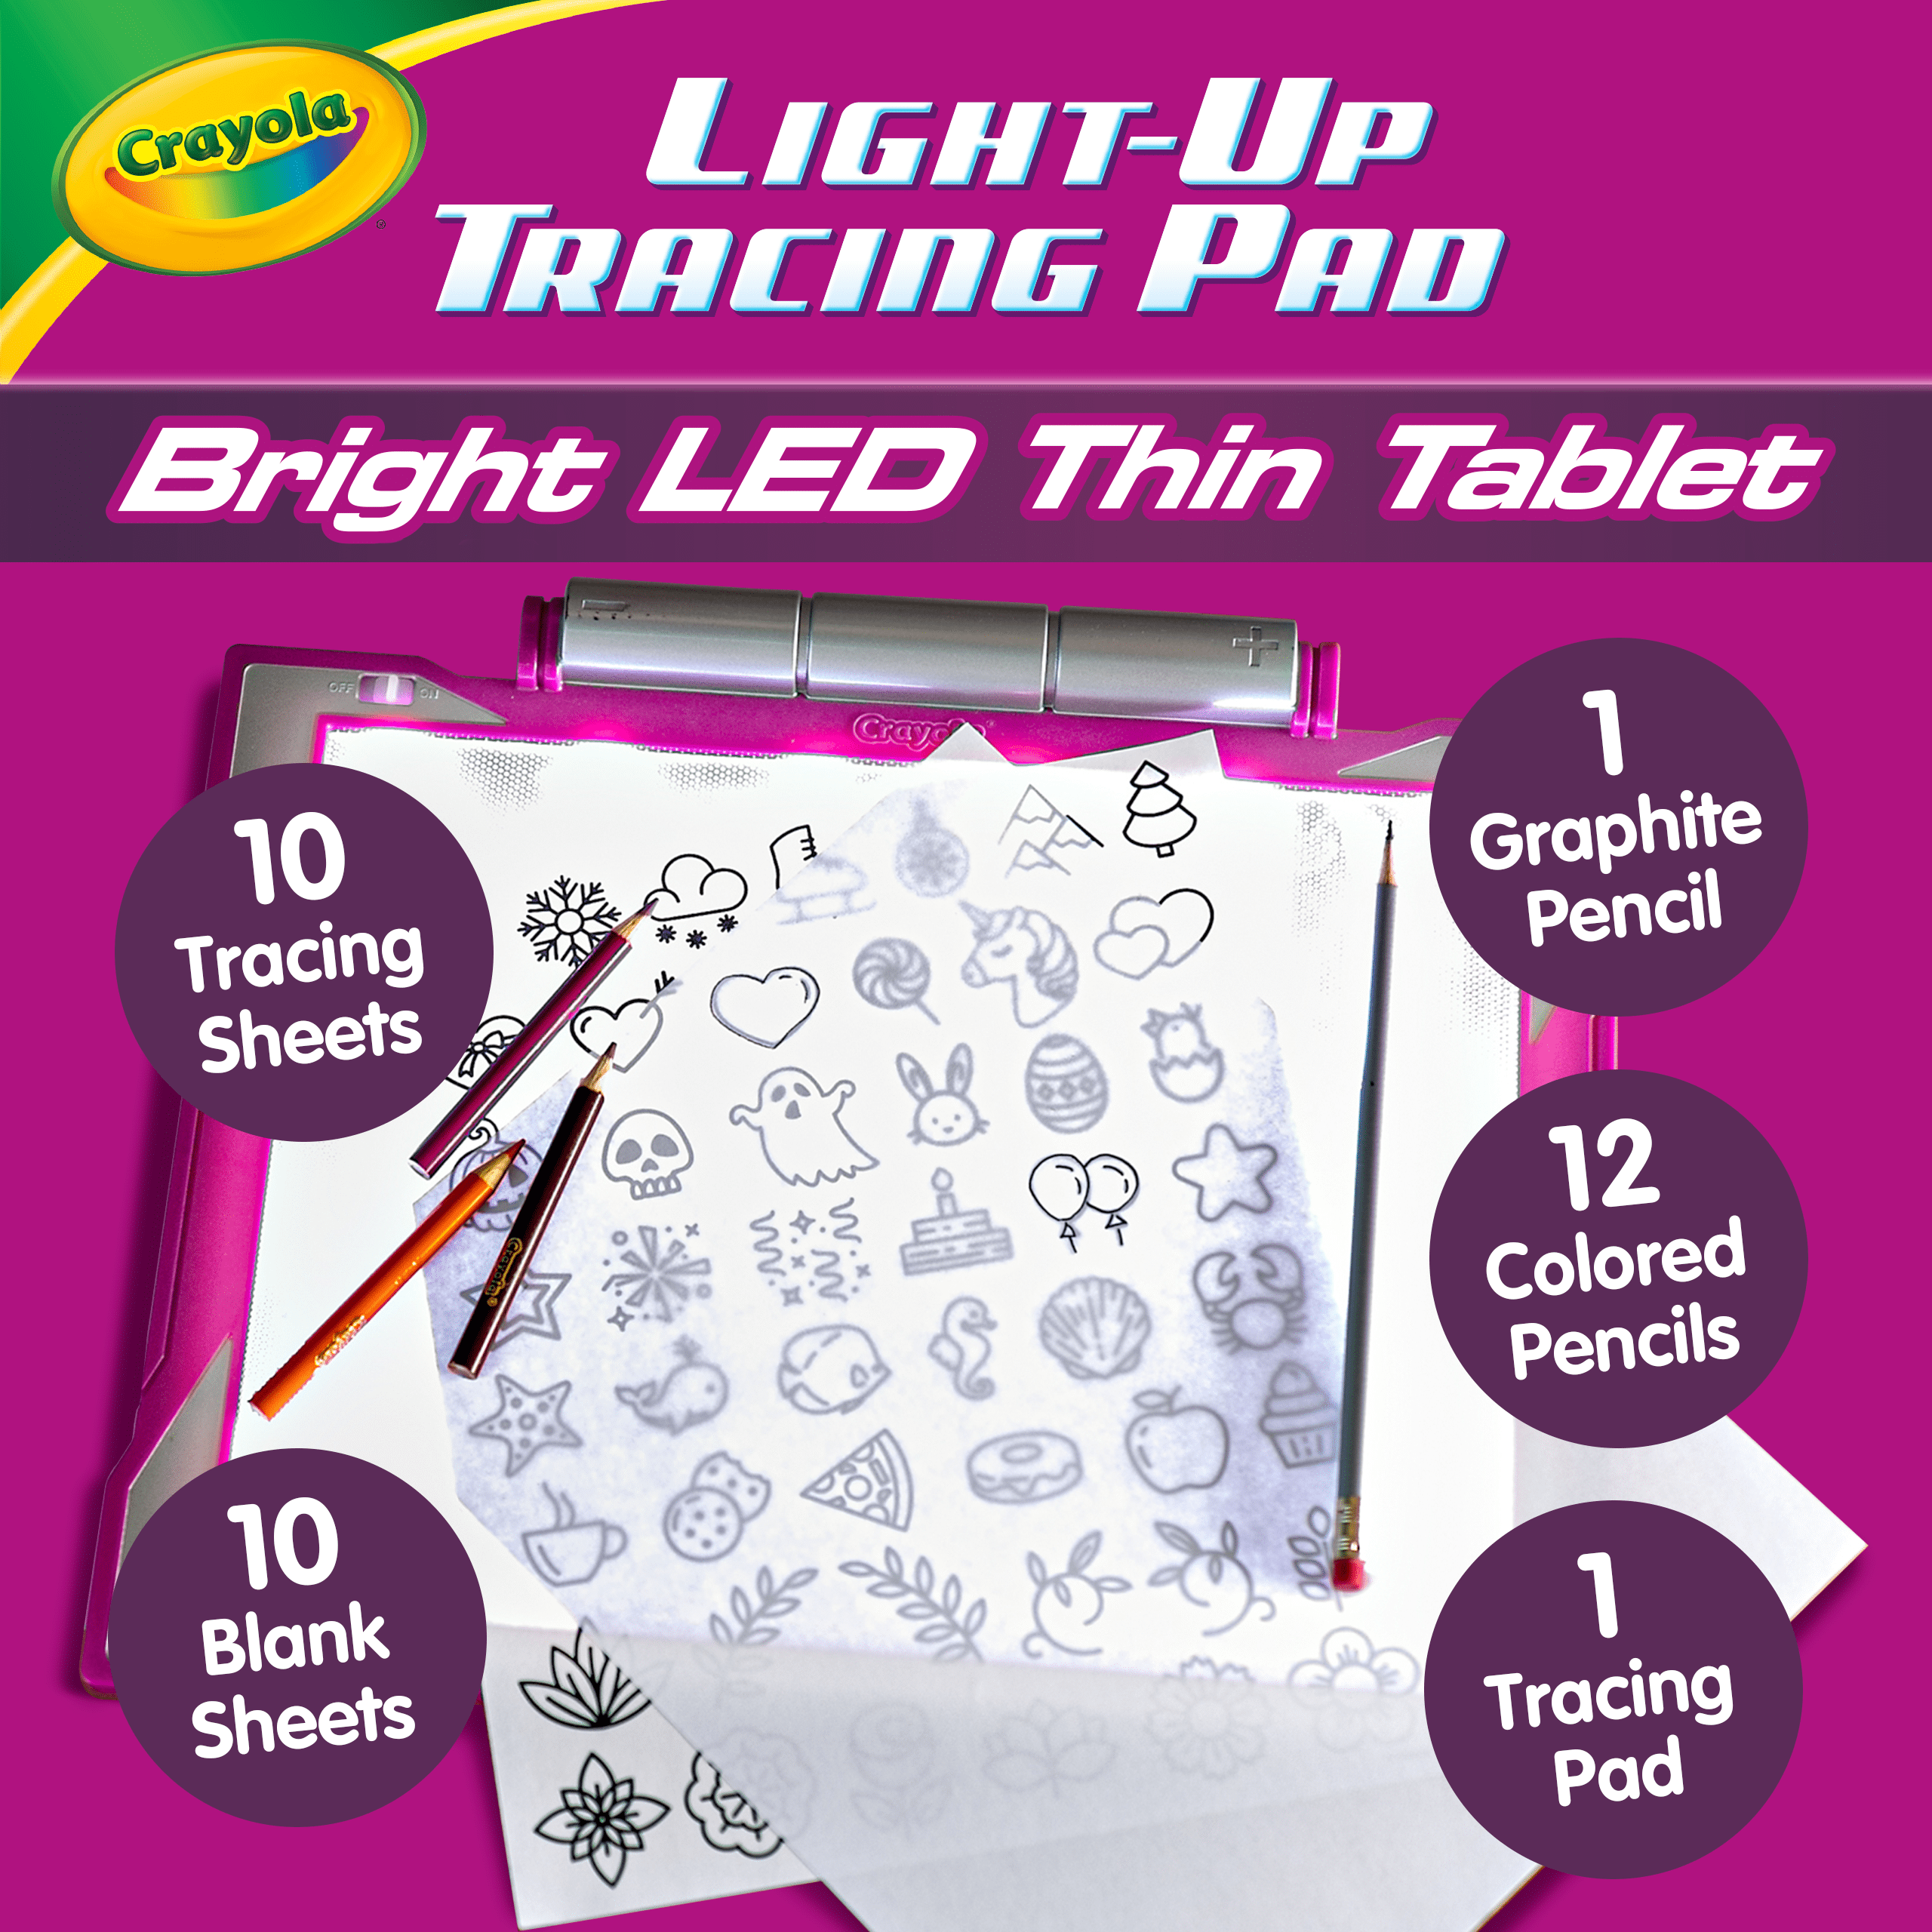 Zyerch Light Up Tracing Pad, Fashion Design Activity Kit for Girls, Eye-Soft Technology, 5 Colored Pencils, Gifts for Children Ages 6, 7, 8, 9, 10